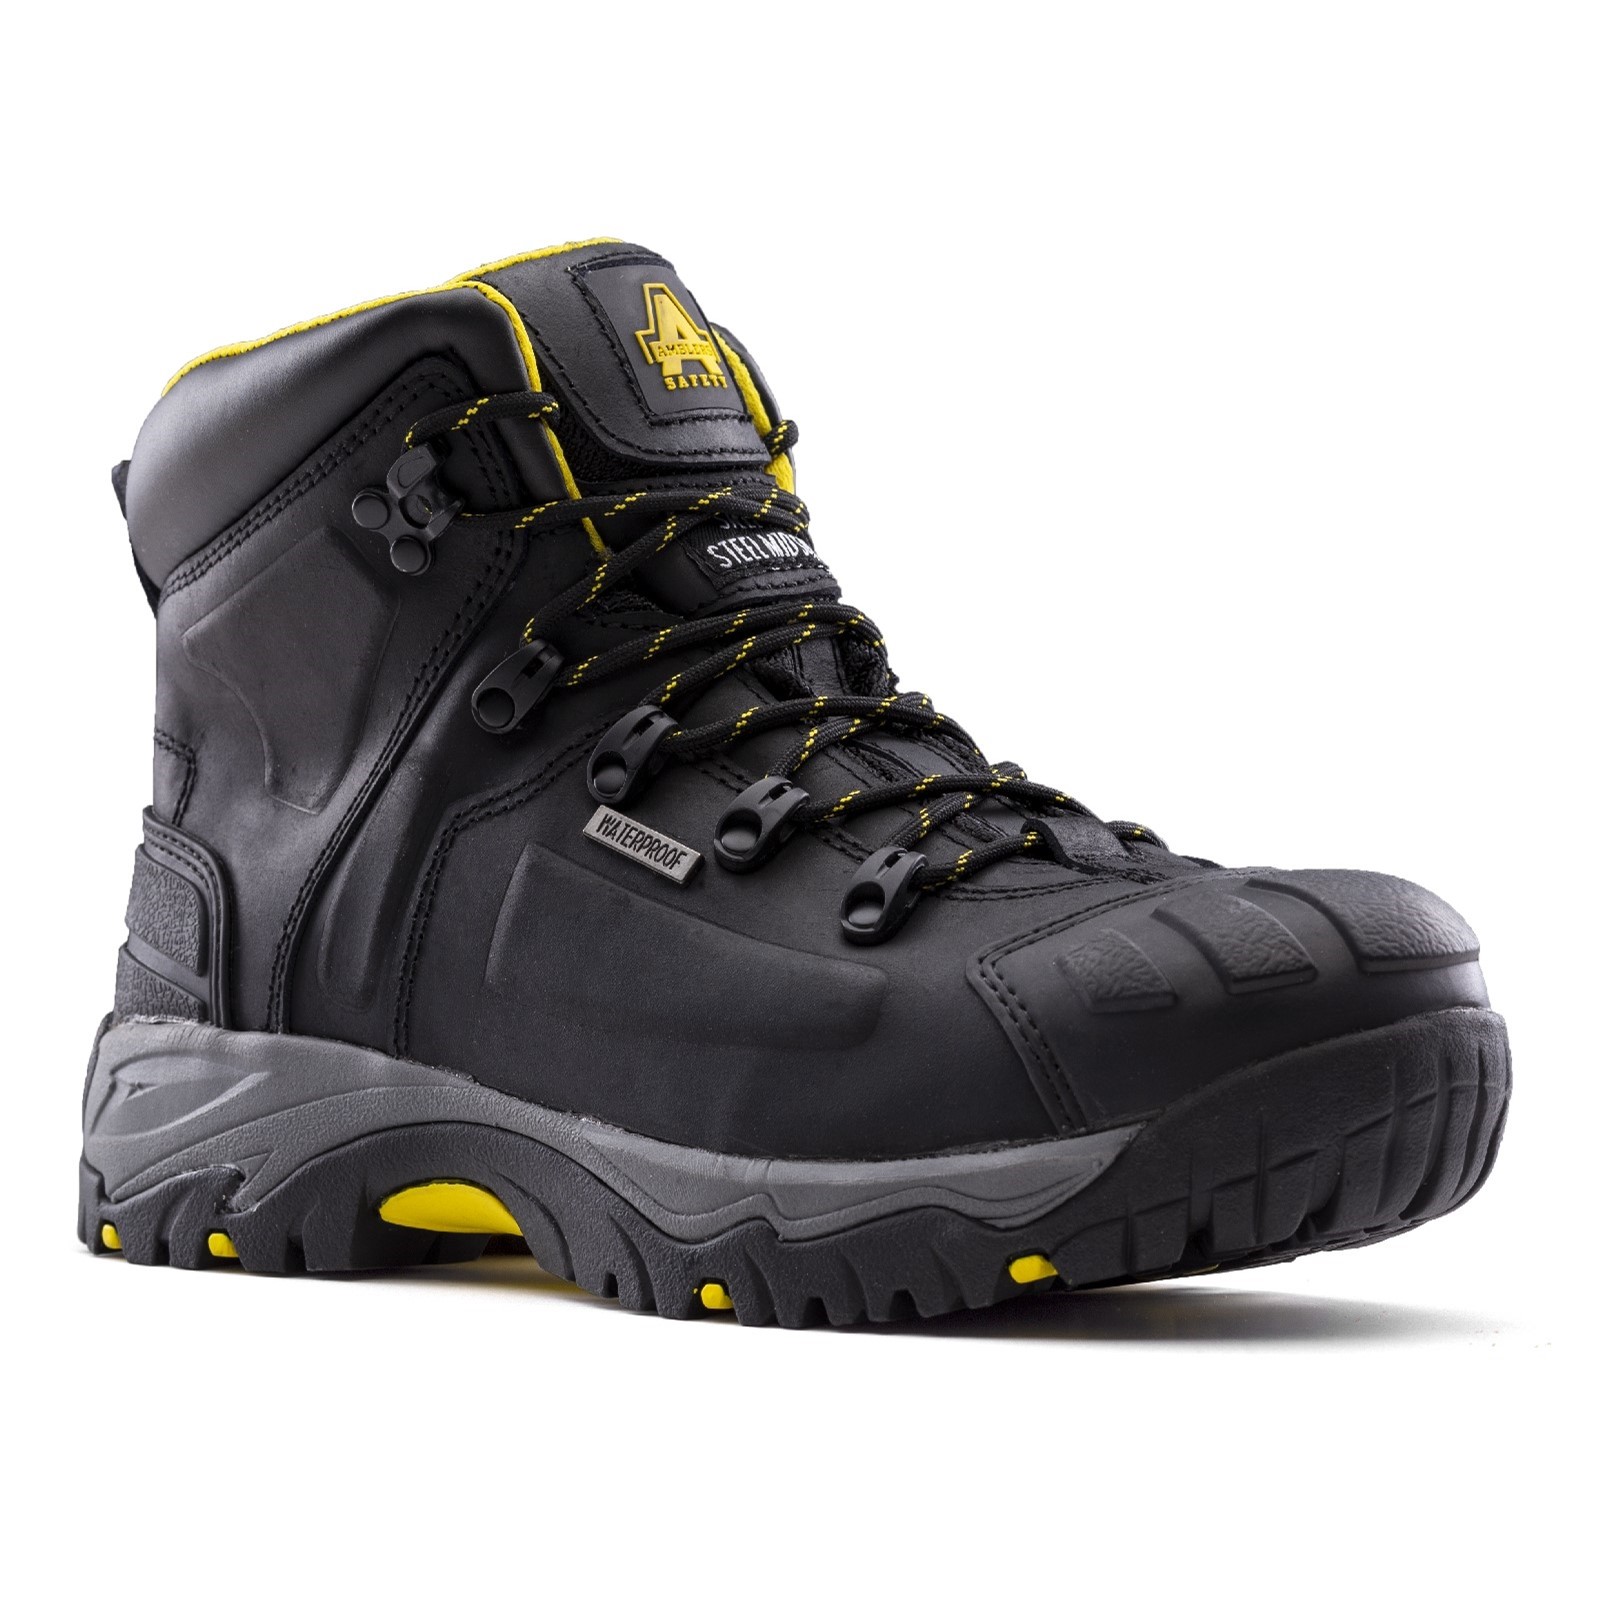 AS803 Waterproof Wide Fit Safety Boot